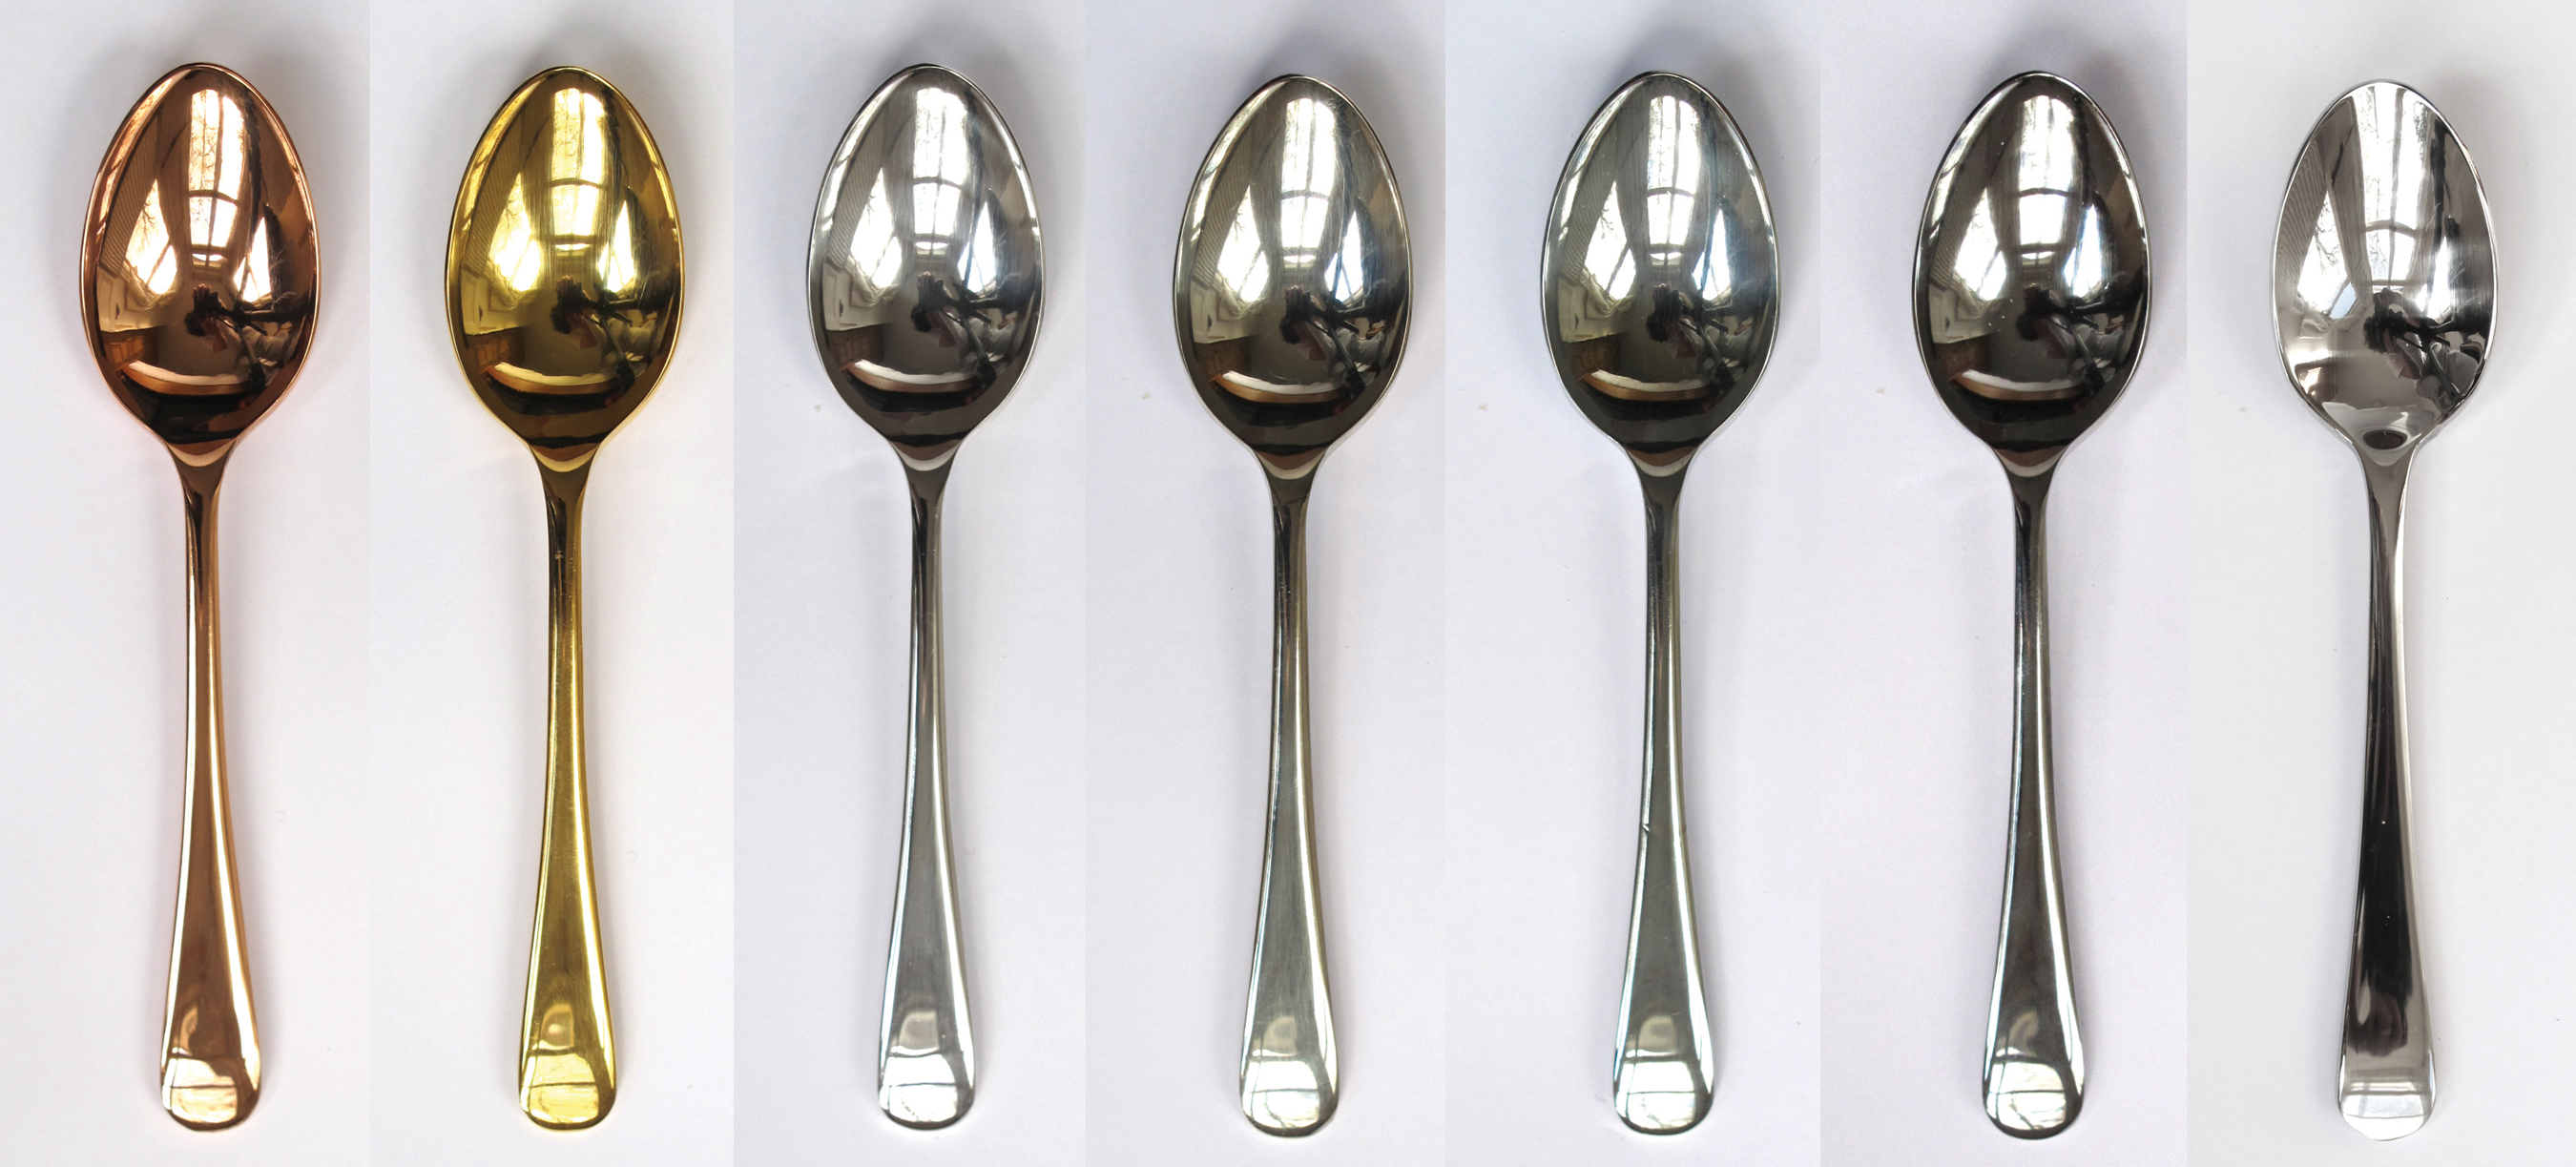 The Golden Spoon. How eating utensils change the taste of…, by Nicola  Twilley, re:form